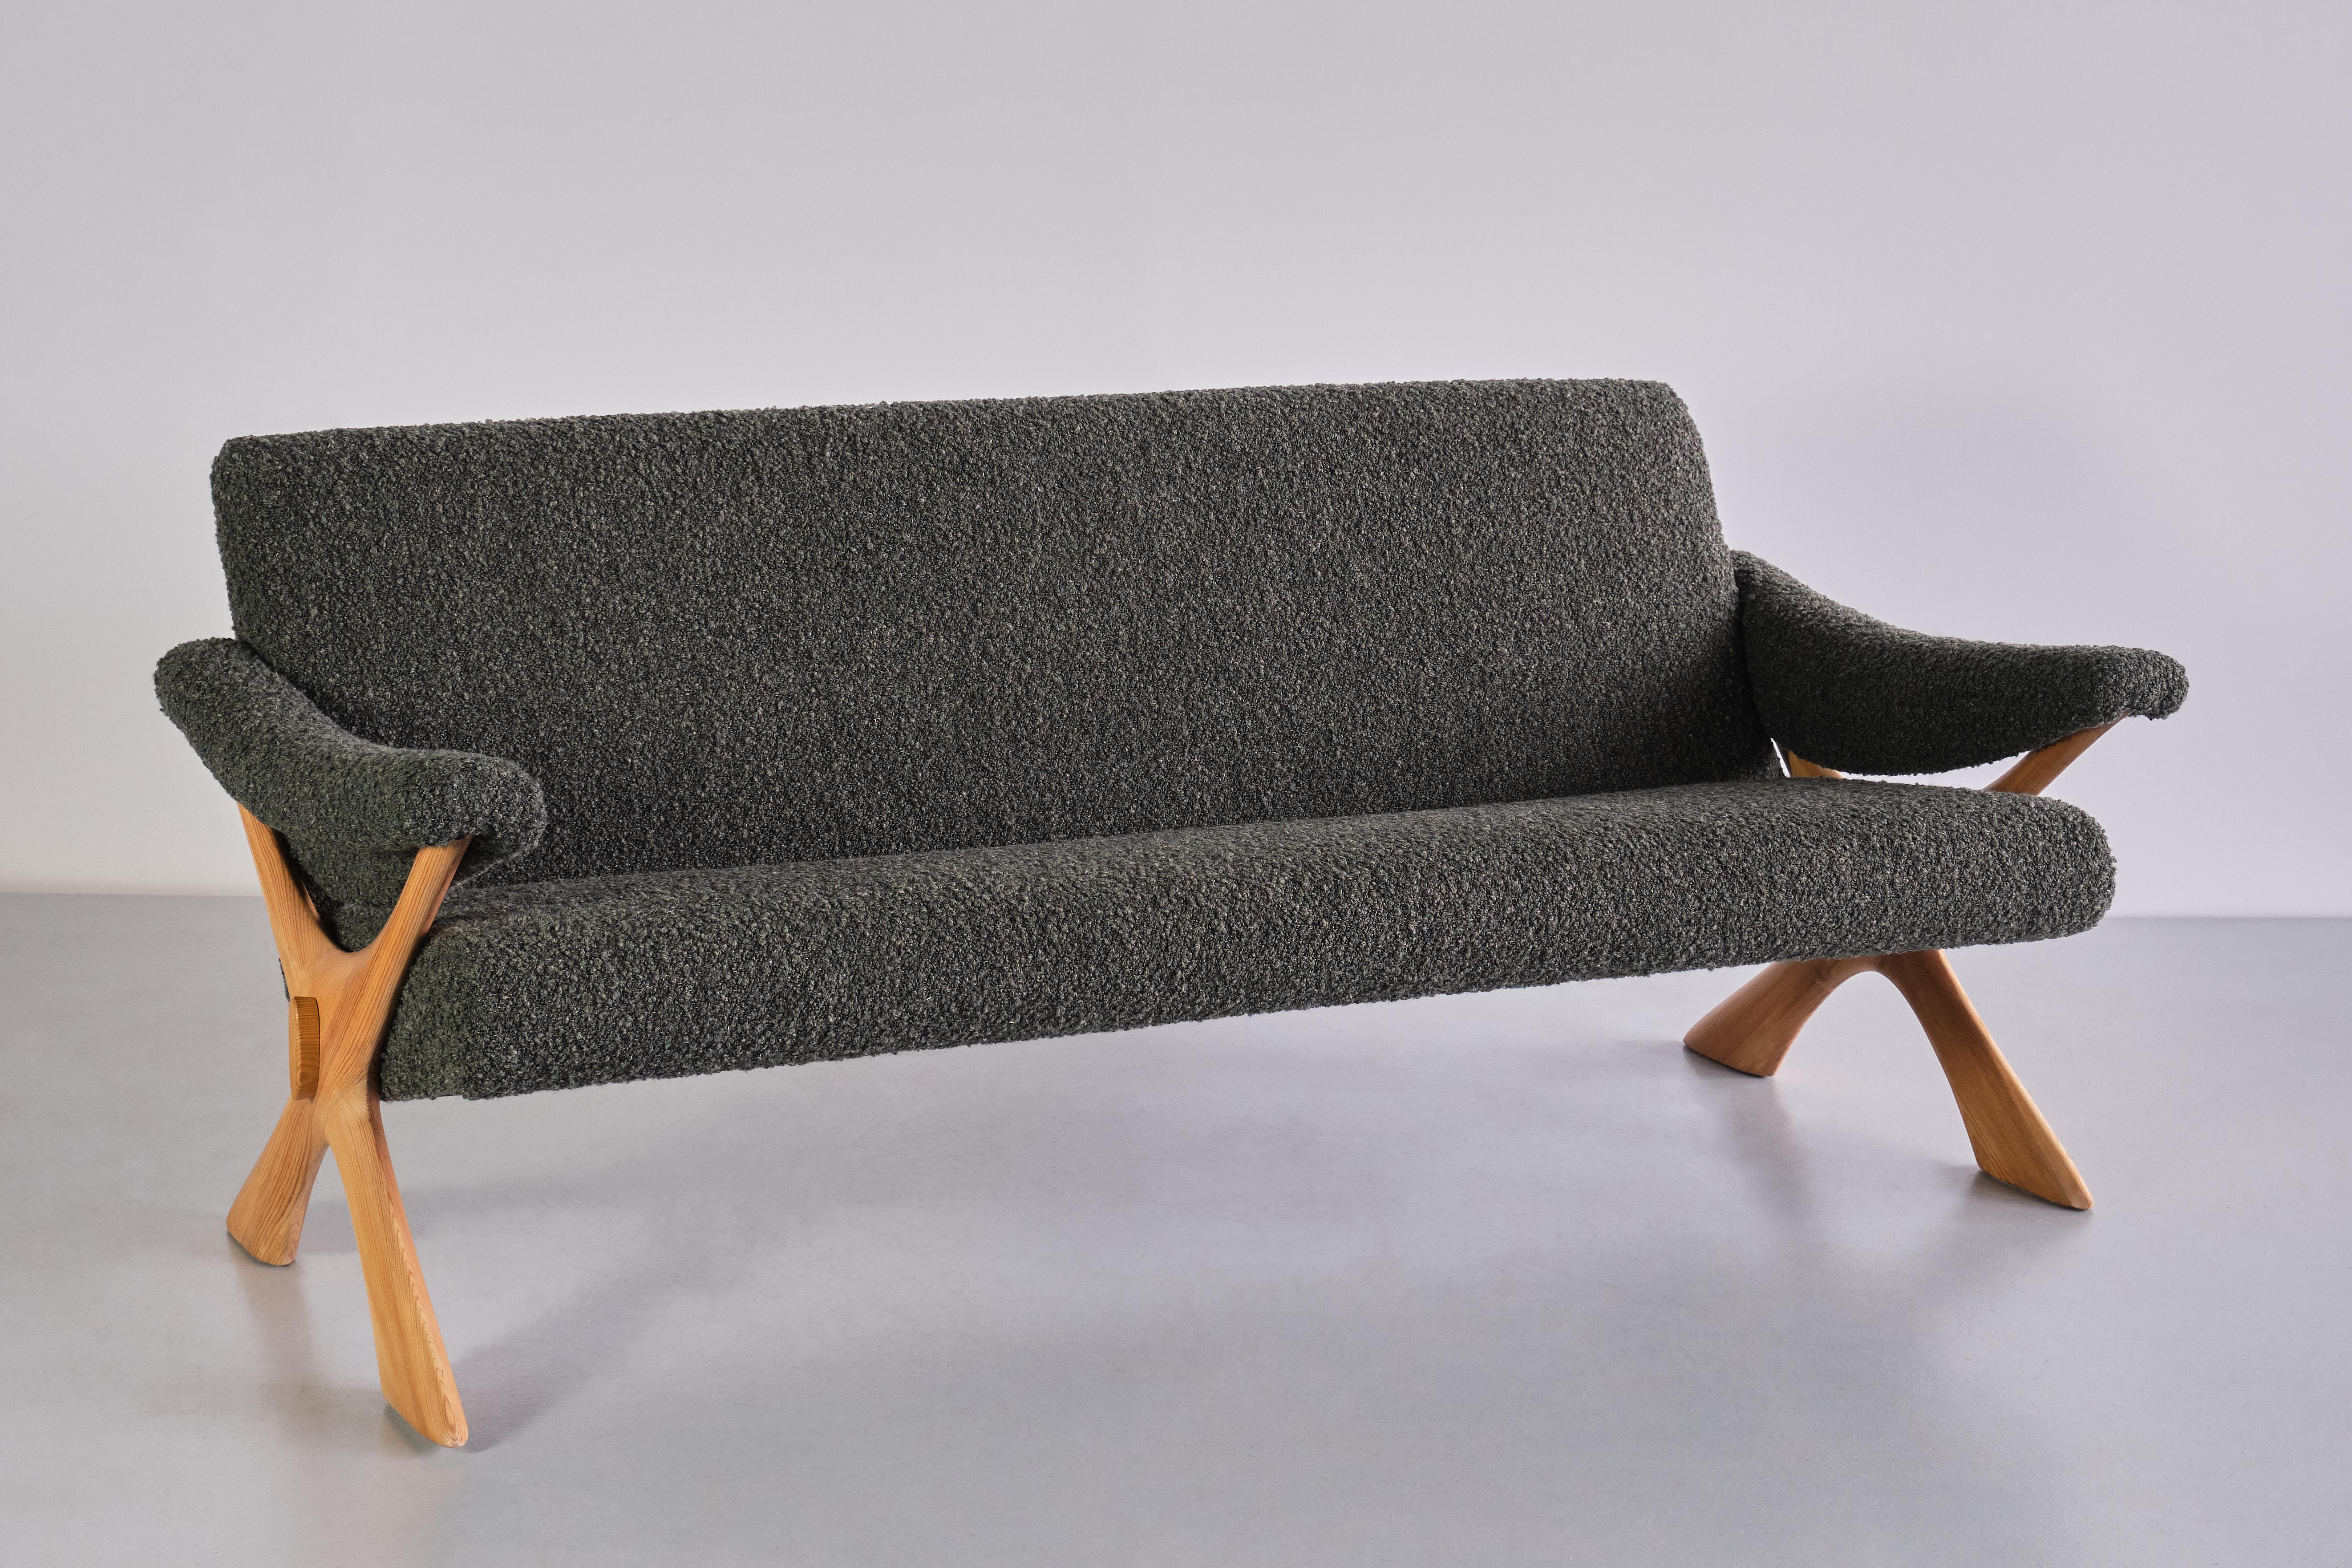 This very rare sofa was designed by Fredrik Schriever-Abeln in the 1960s. This particular model named 'Condor' was produced in Sweden. Schriever Abeln's Condor range consisted of the iconic coffee table and a matching armchair and sofa. All pieces